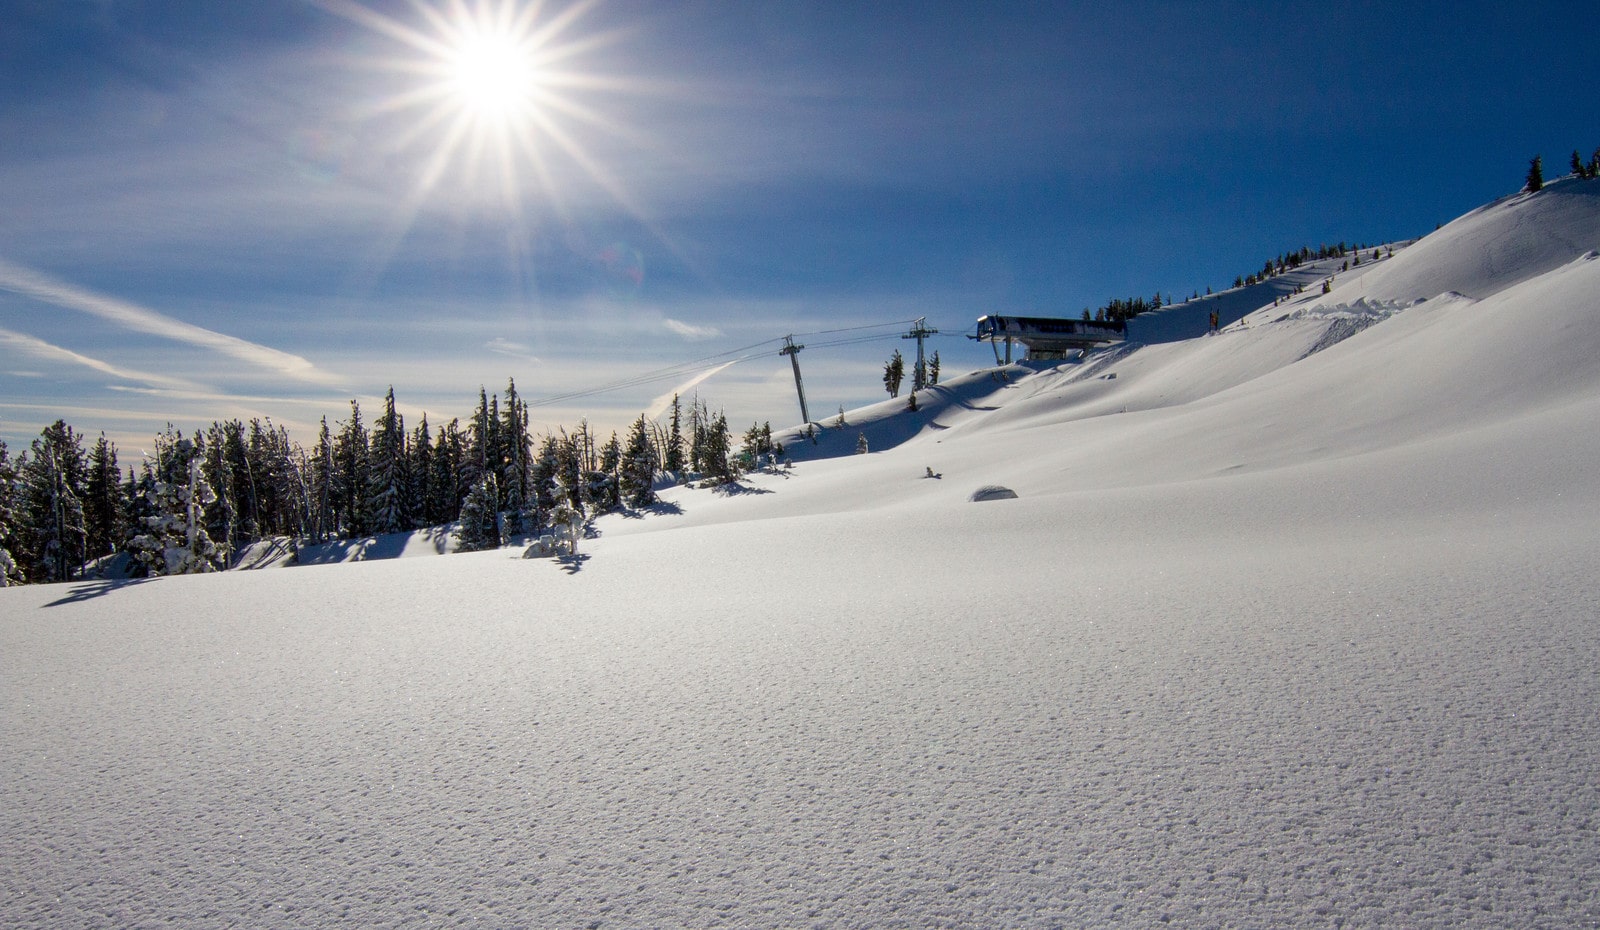 Mount Bachelor will offer cheap lift tickets for signing liability waivers